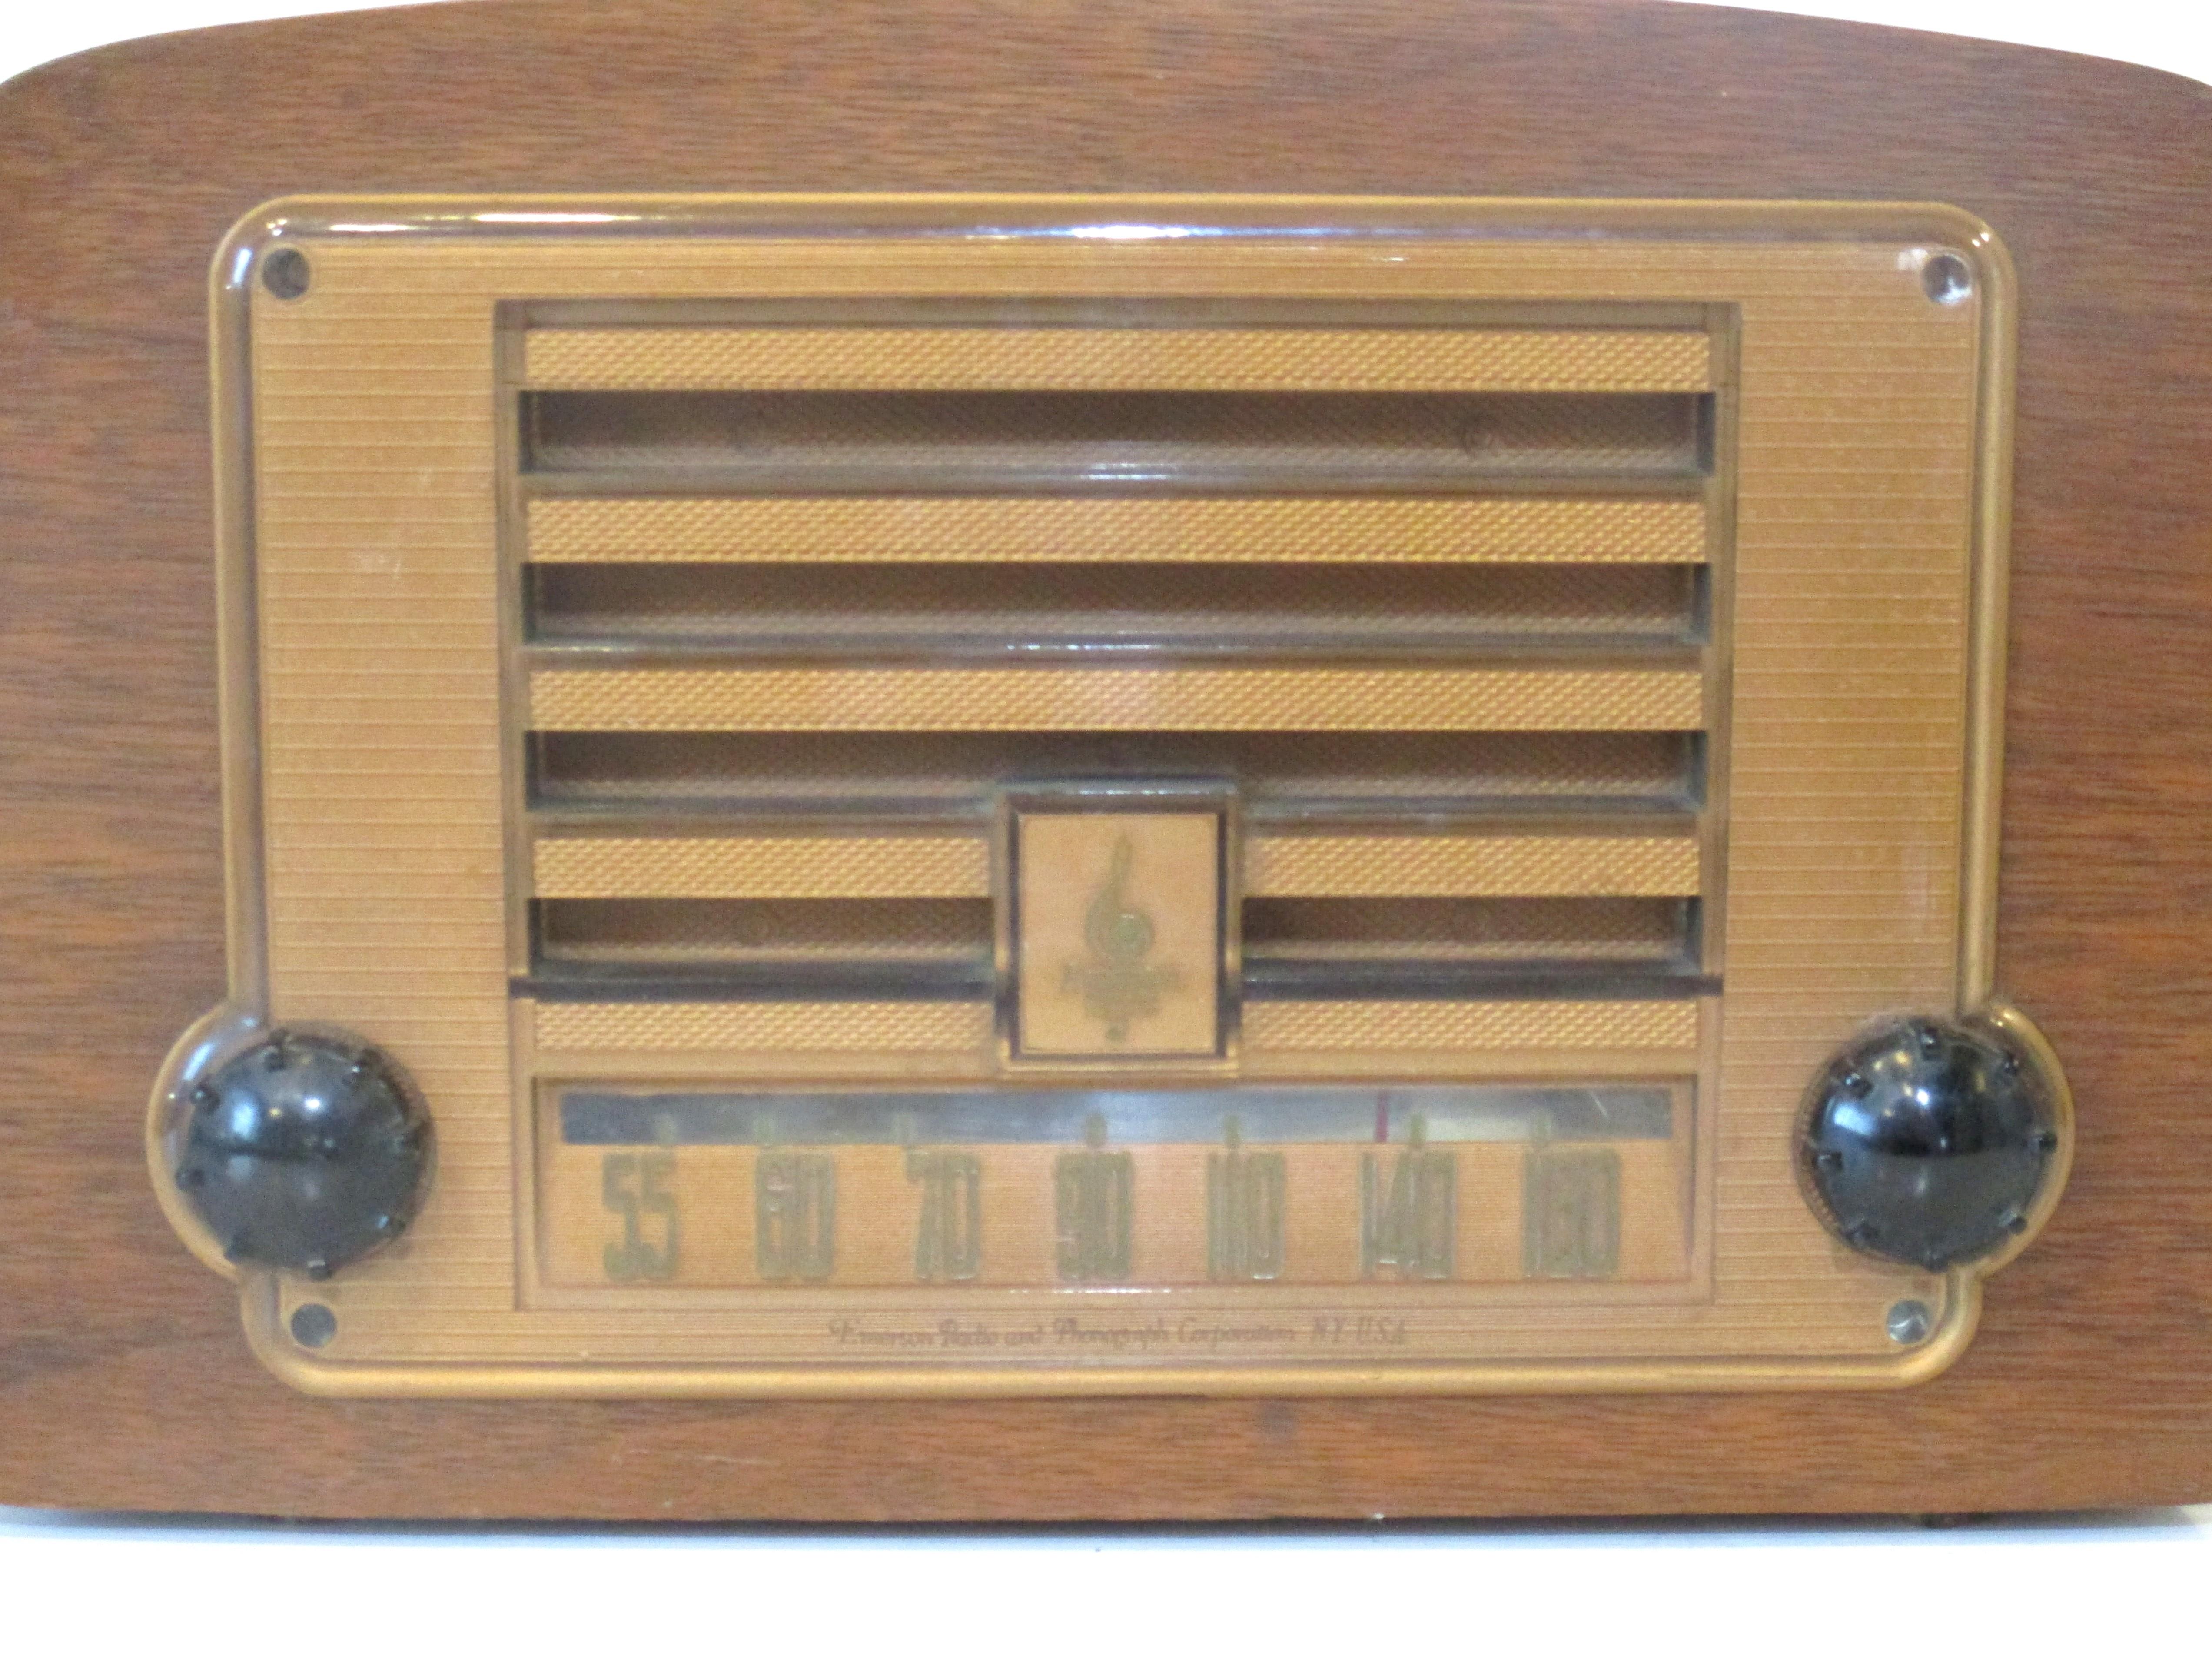 Mid-Century Modern Eames Designed Radio by Emerson and Evans Products, 1946